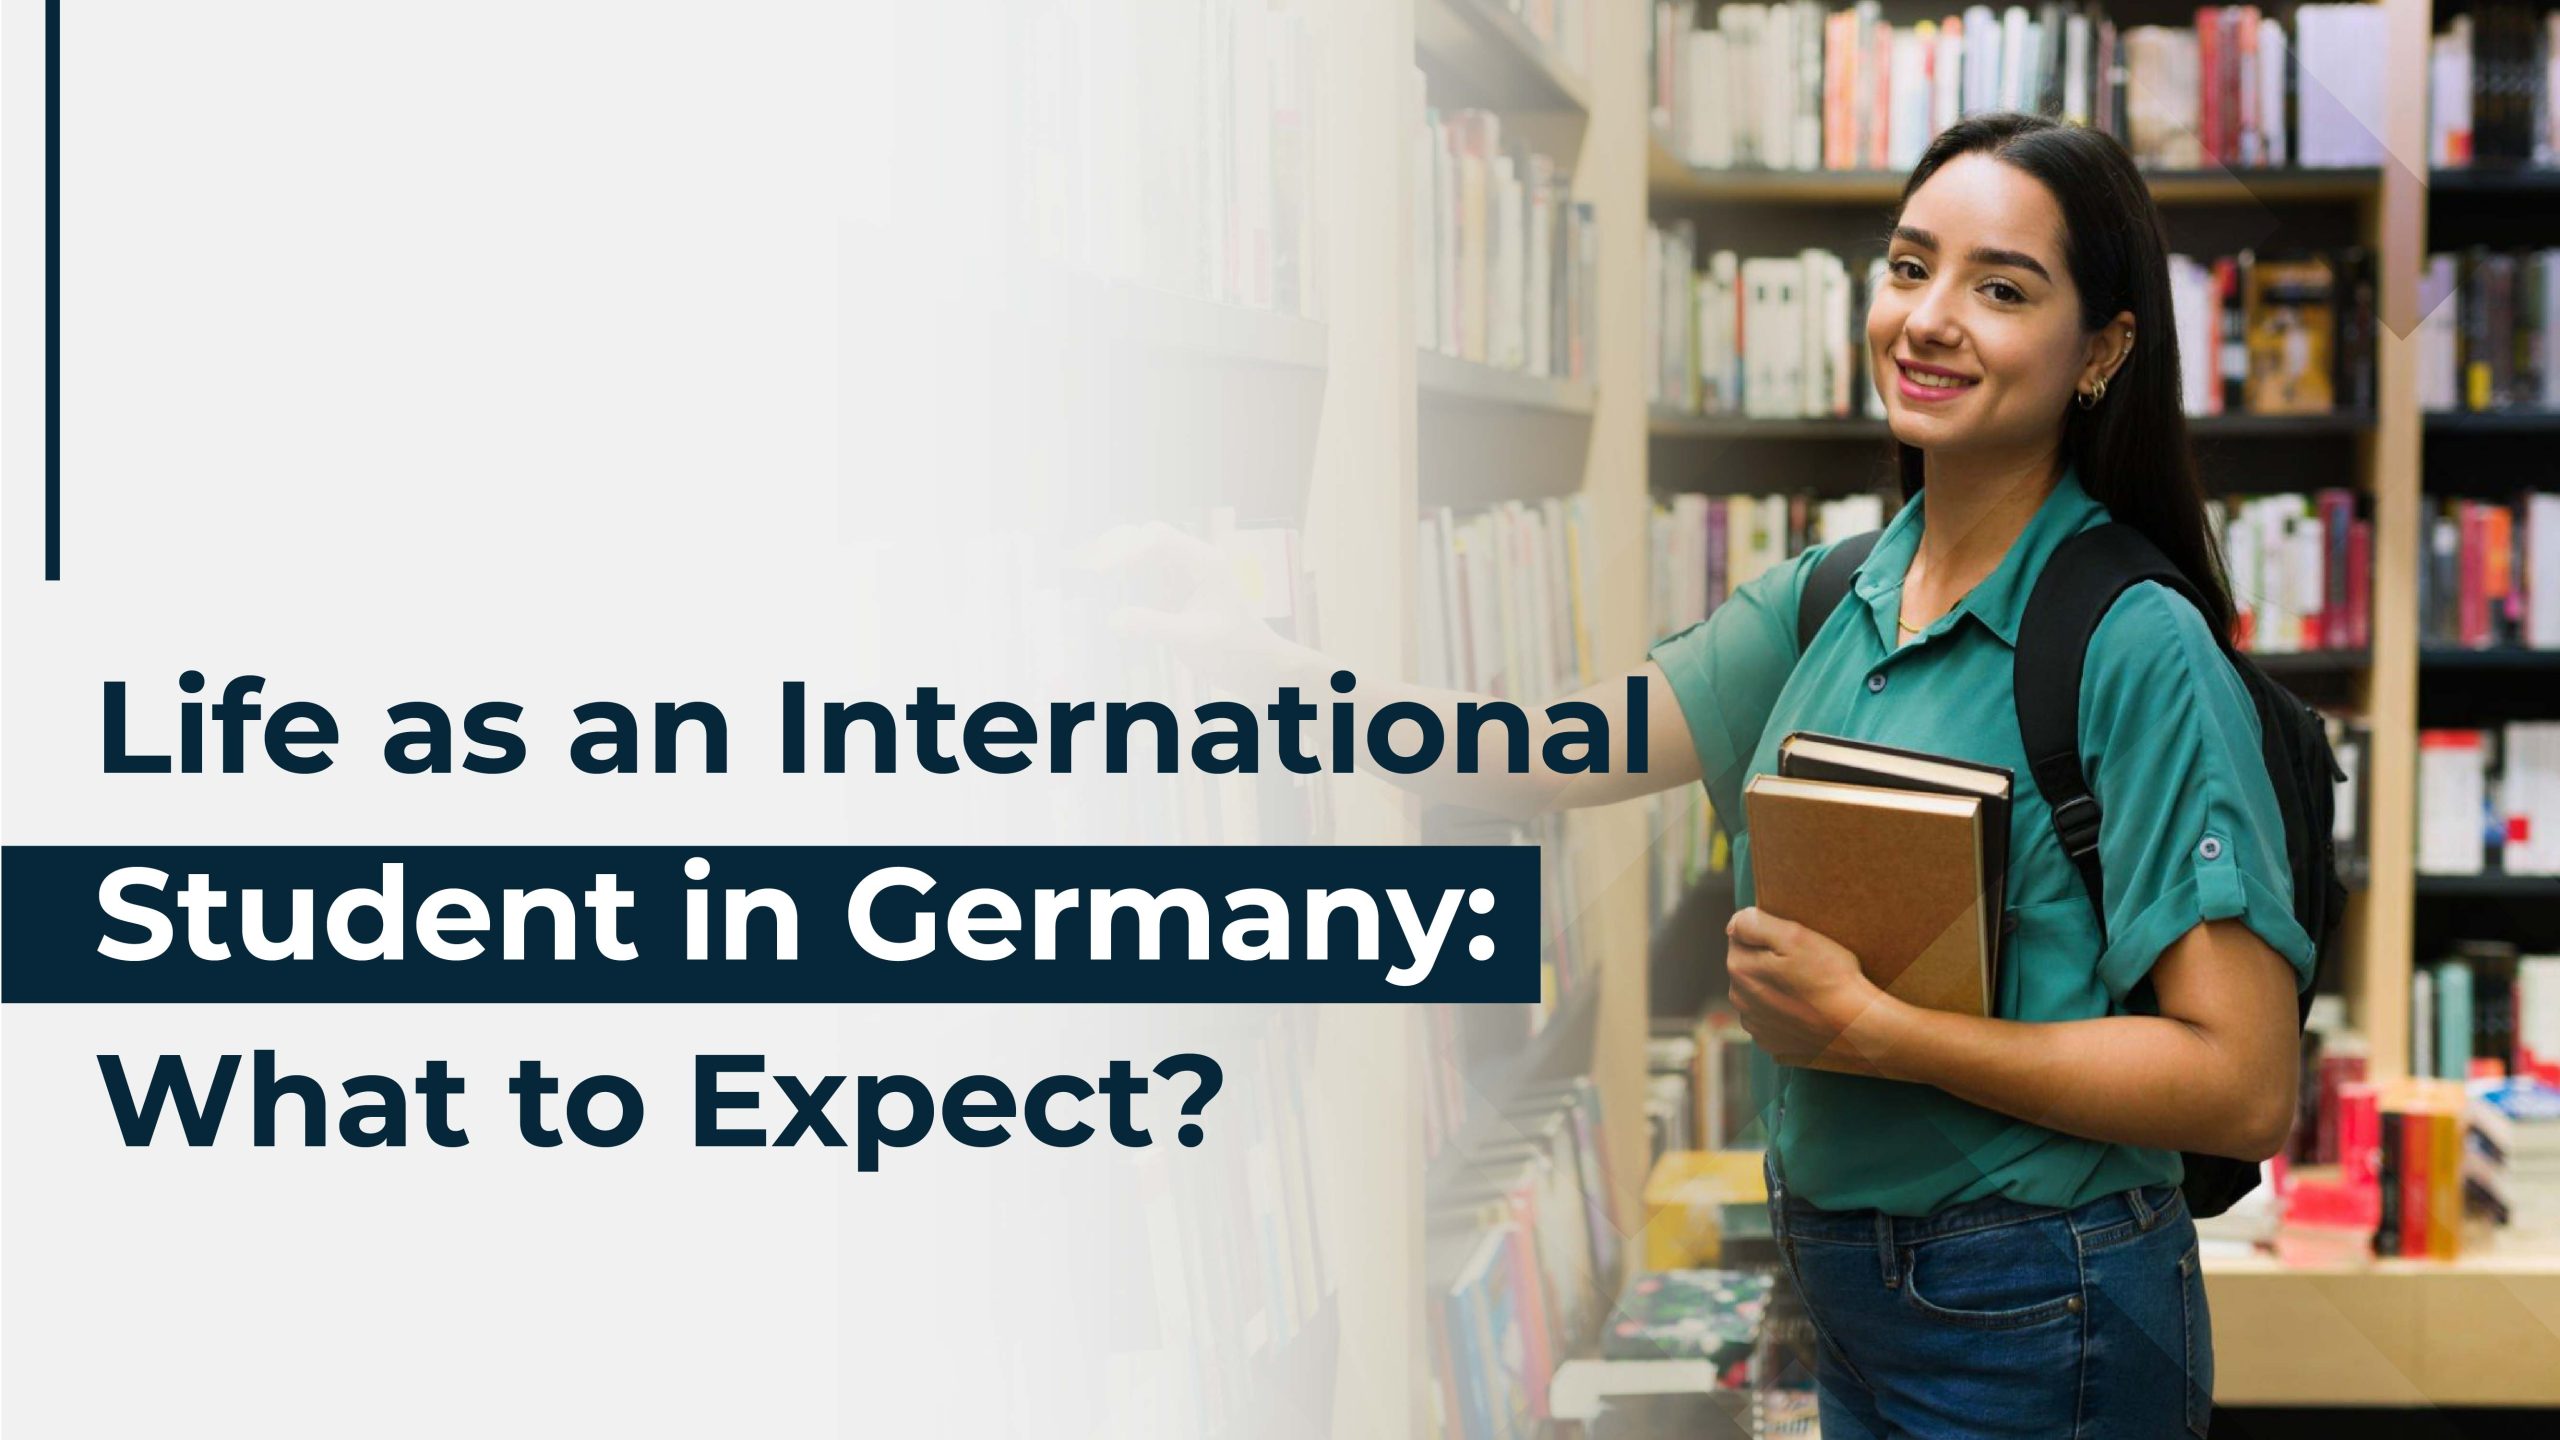 Life as an International Student in Germany: What to Expect?